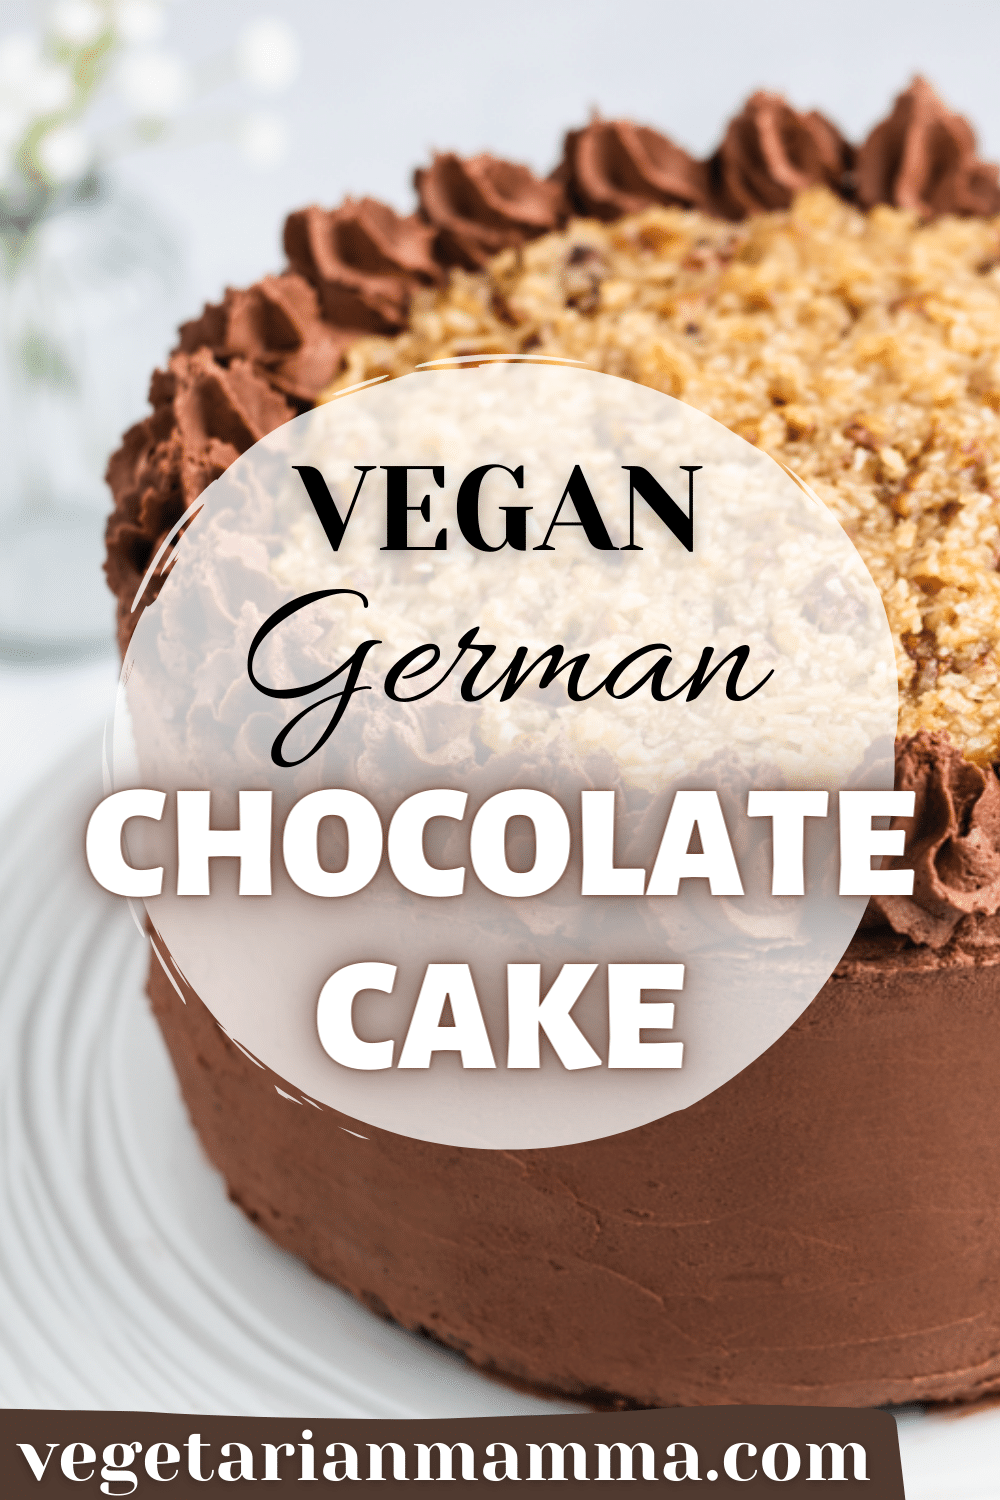 Make the best vegan German chocolate cake from scratch! The moist chocolate cakes are topped with coconut and pecan icing and creamy chocolate buttercream.